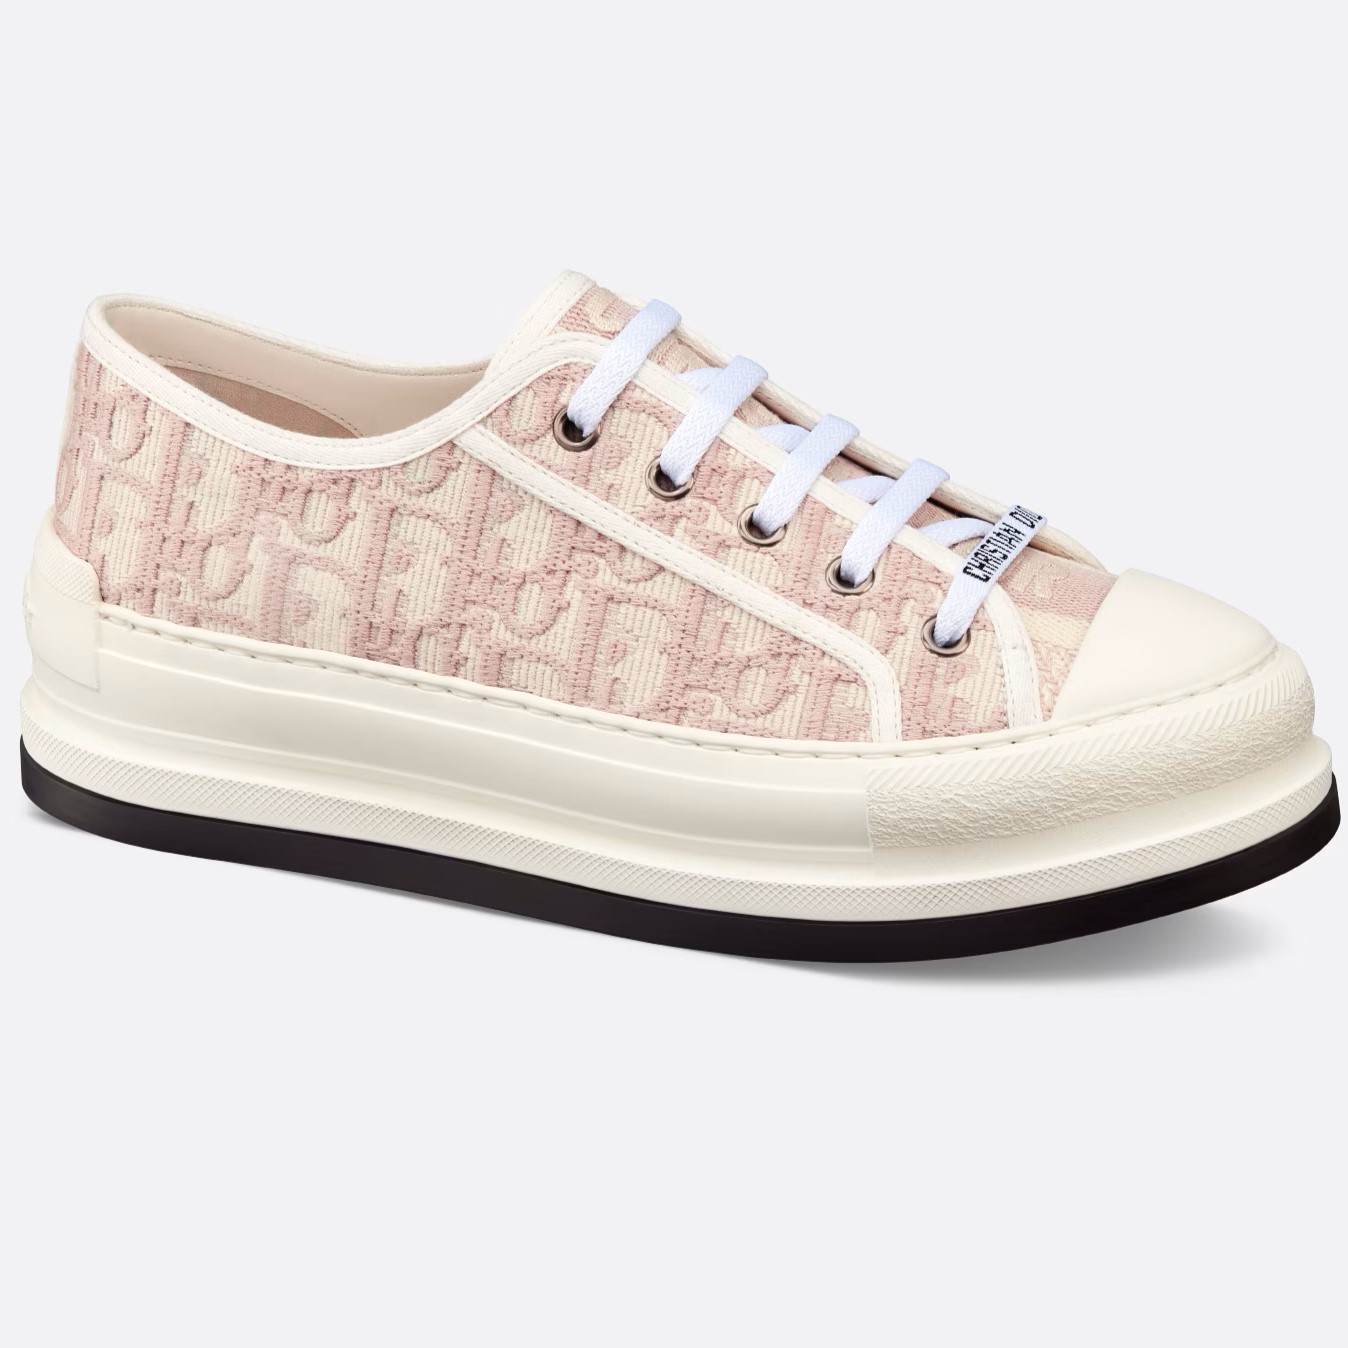 GIÀY THỂ THAO NỮ WALK N DIOR PLATFORM SNEAKER IN NUDE DIOR OBLIQUE EMBROIDERED COTTON 3